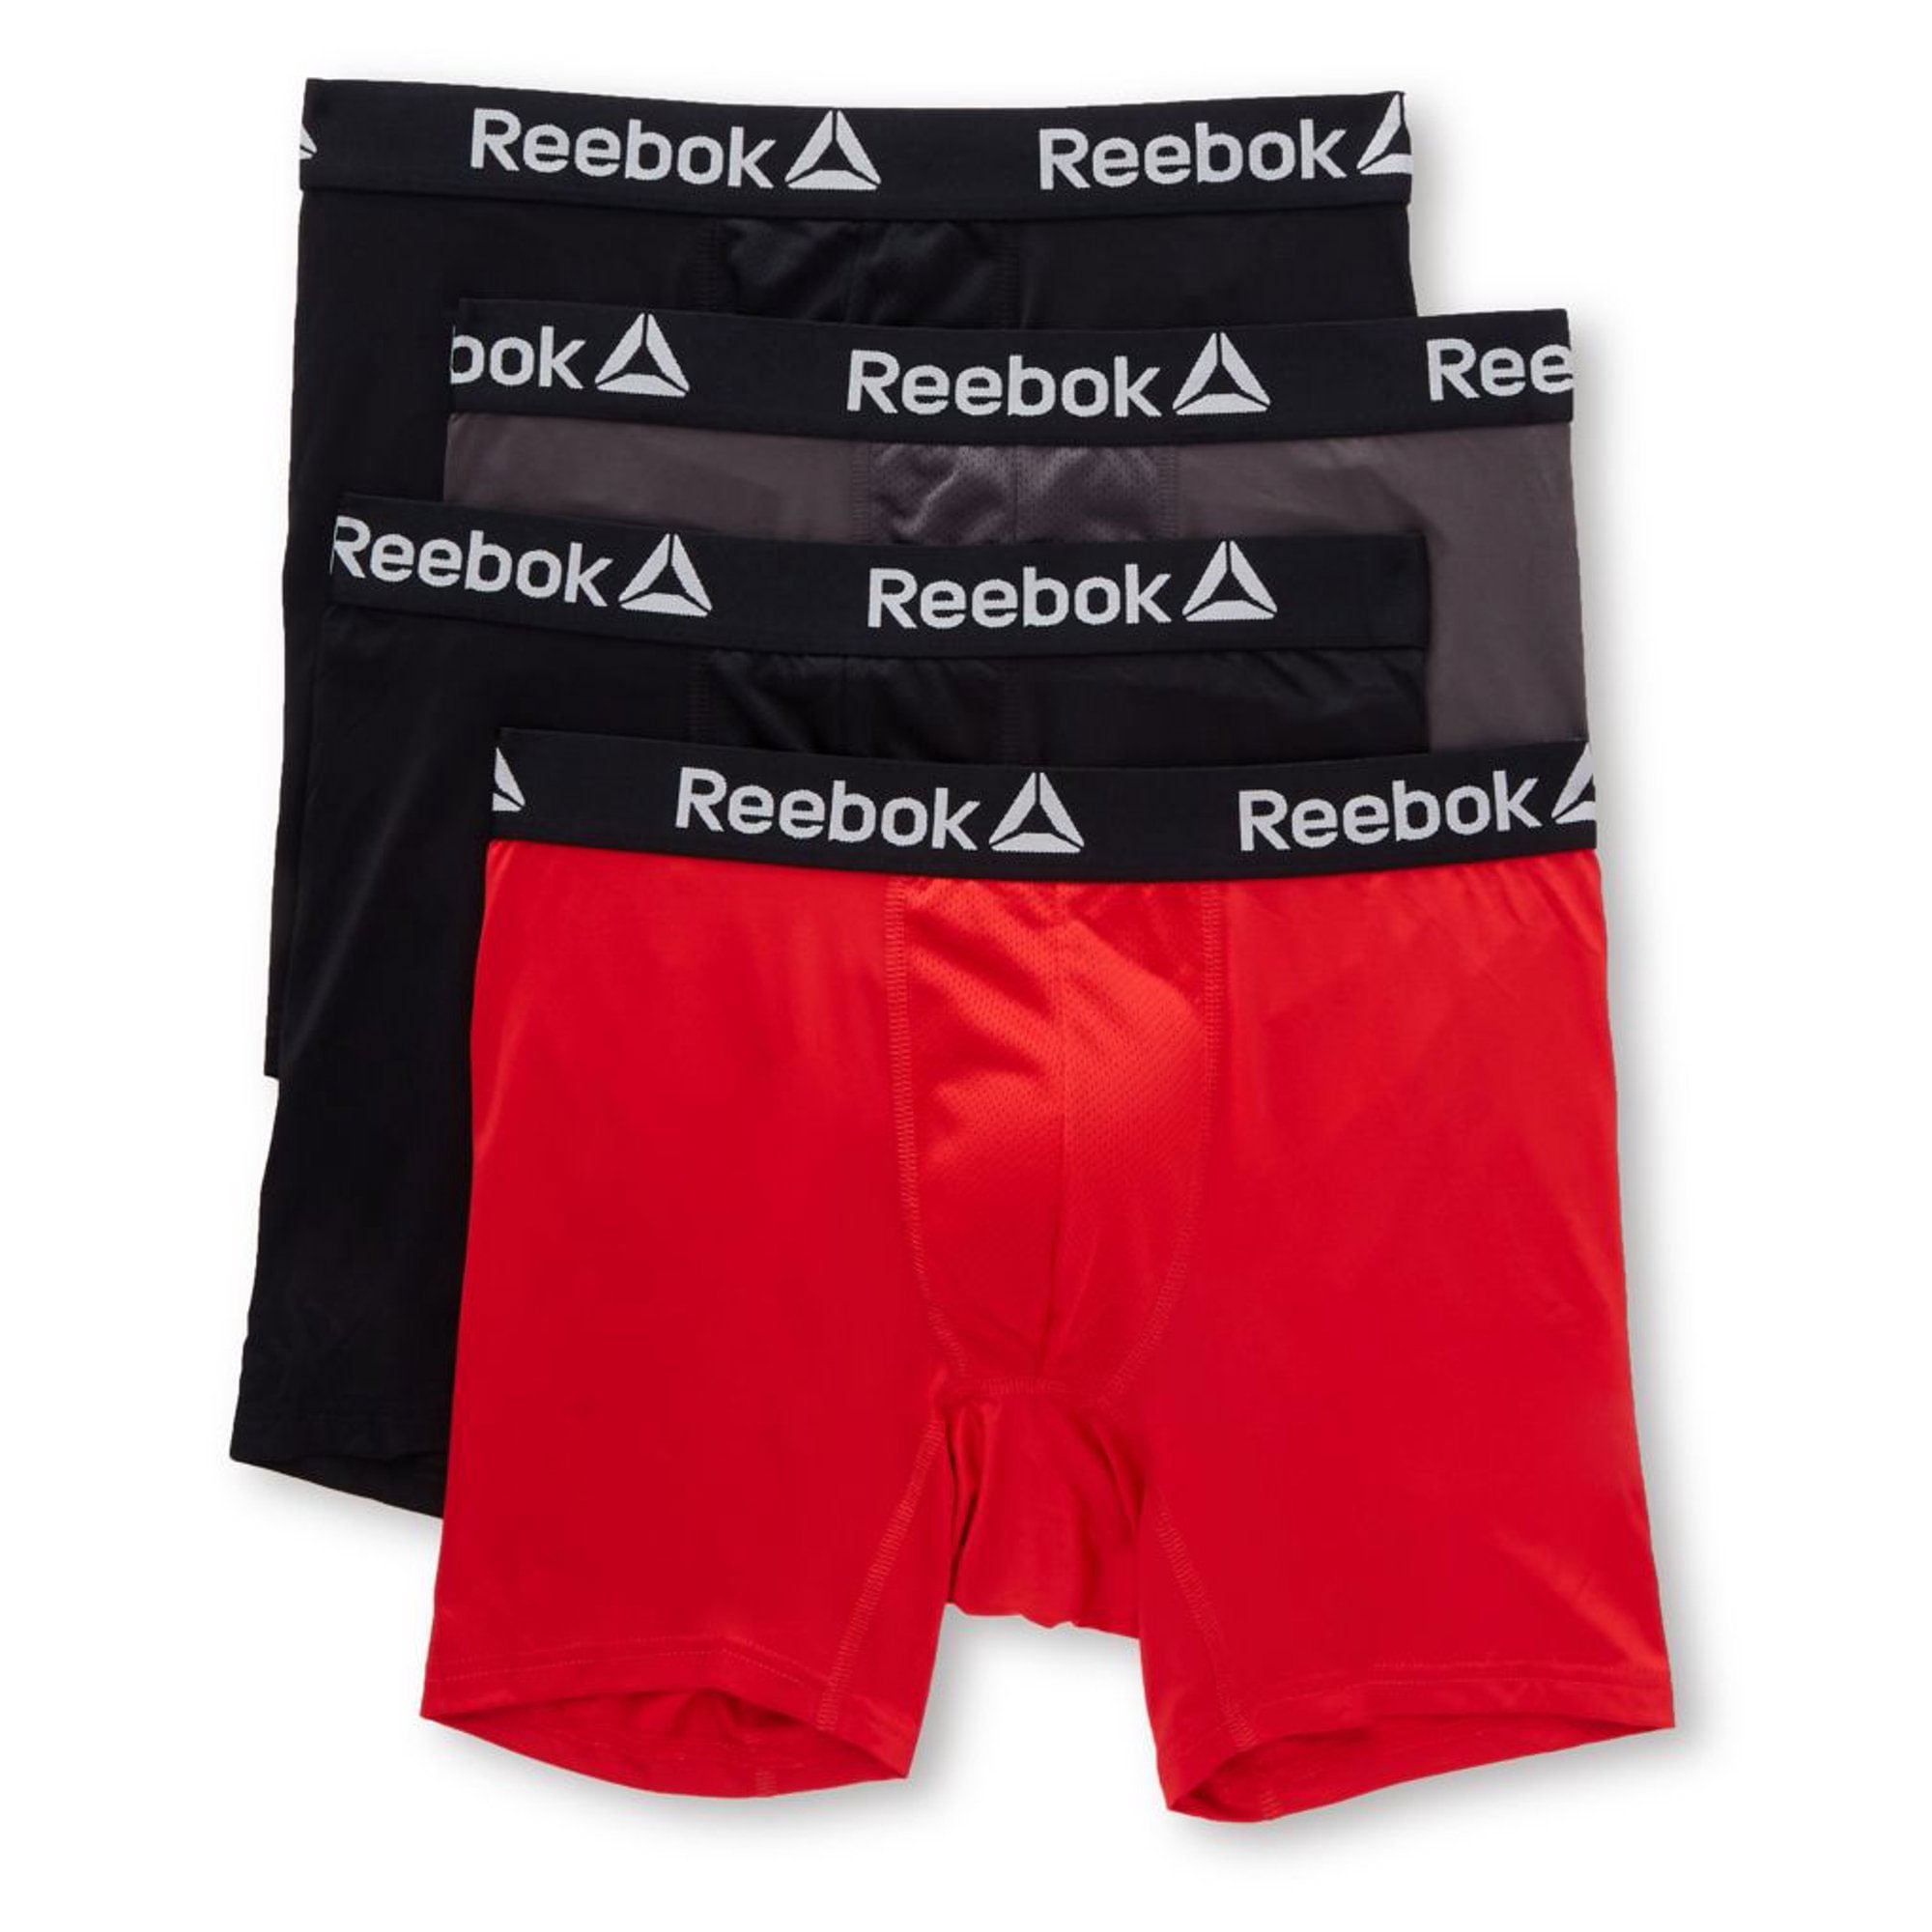 Details about   Reebok Men's 4 & 8 Pack Performance Training Boxer Briefs Size Small 28-30 NEW 